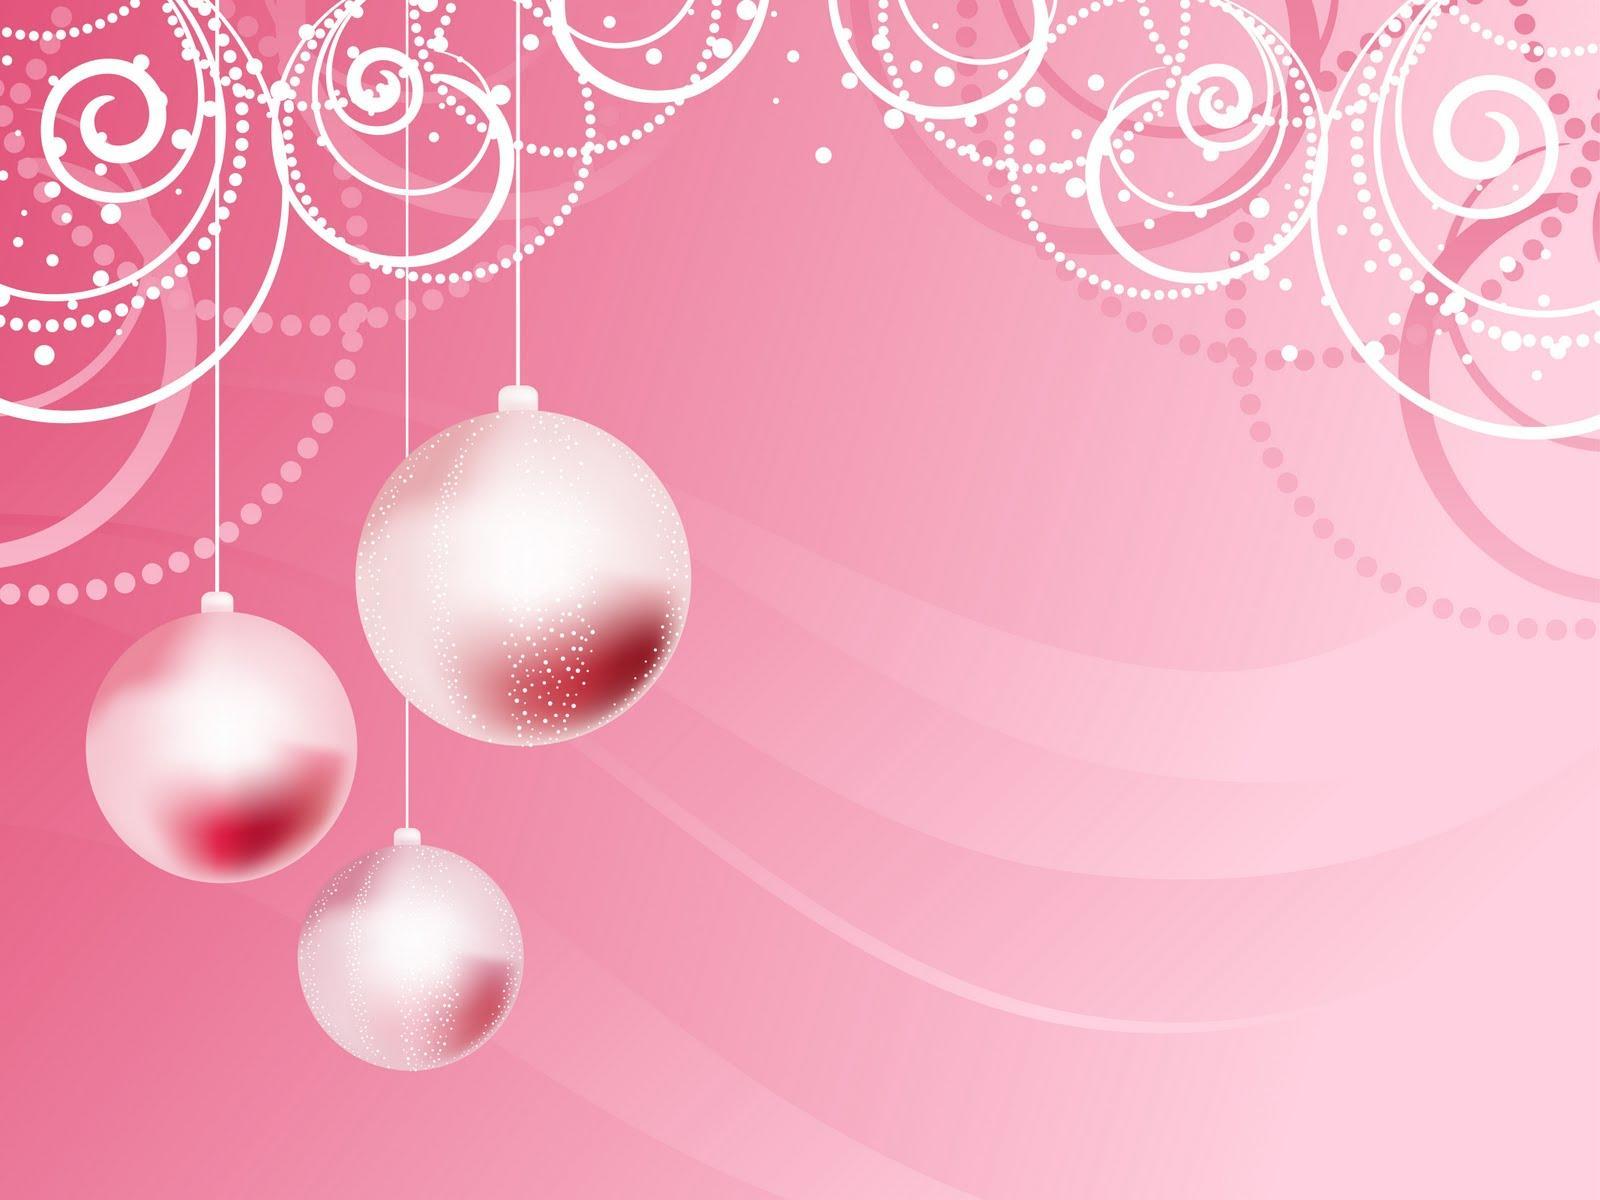 Christmas Backgrounds Photos Download The BEST Free Christmas Backgrounds  Stock Photos  HD Images